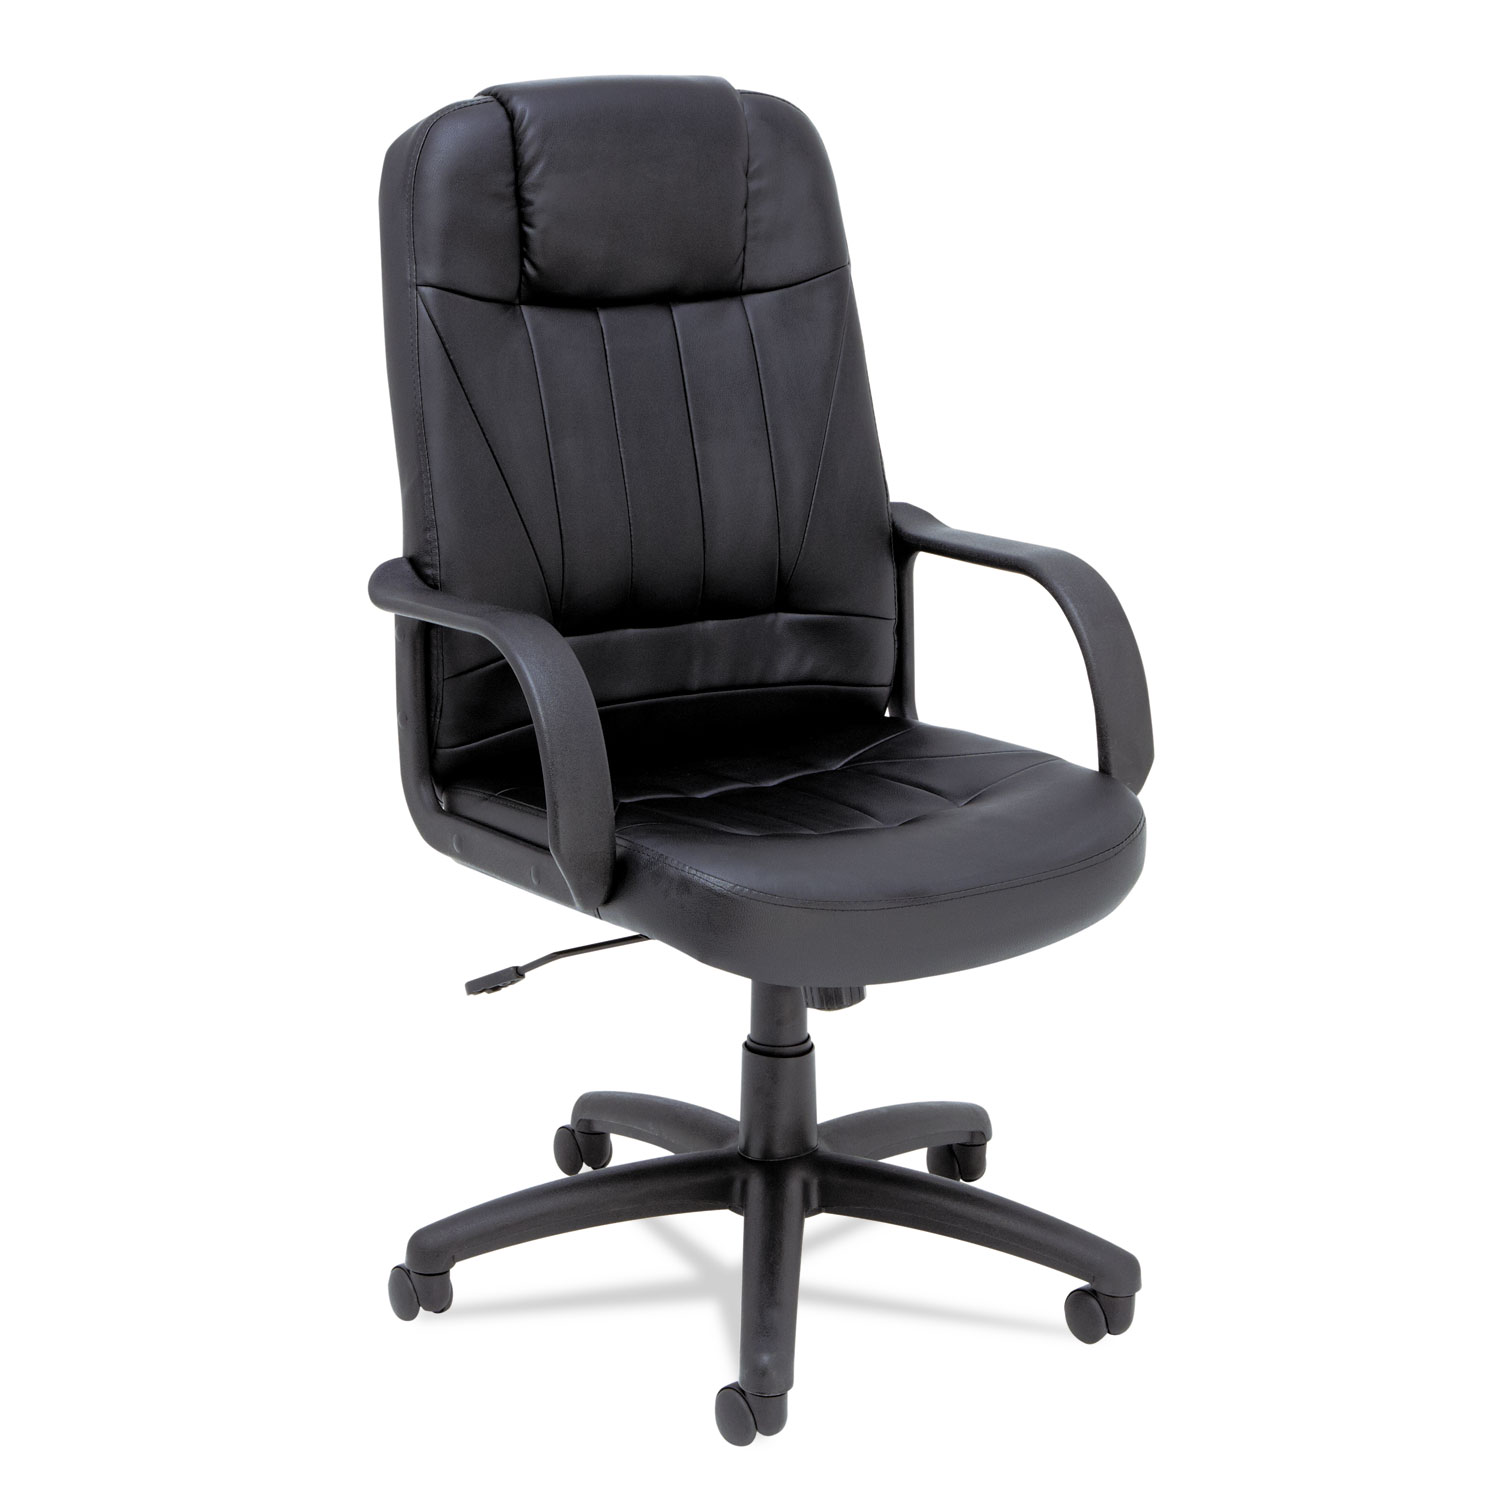  Alera ALESP41LS10B Sparis Executive High-Back Swivel/Tilt Leather Chair, Supports up to 275 lbs., Black Seat/Black Back, Black Base (ALESP41LS10B) 